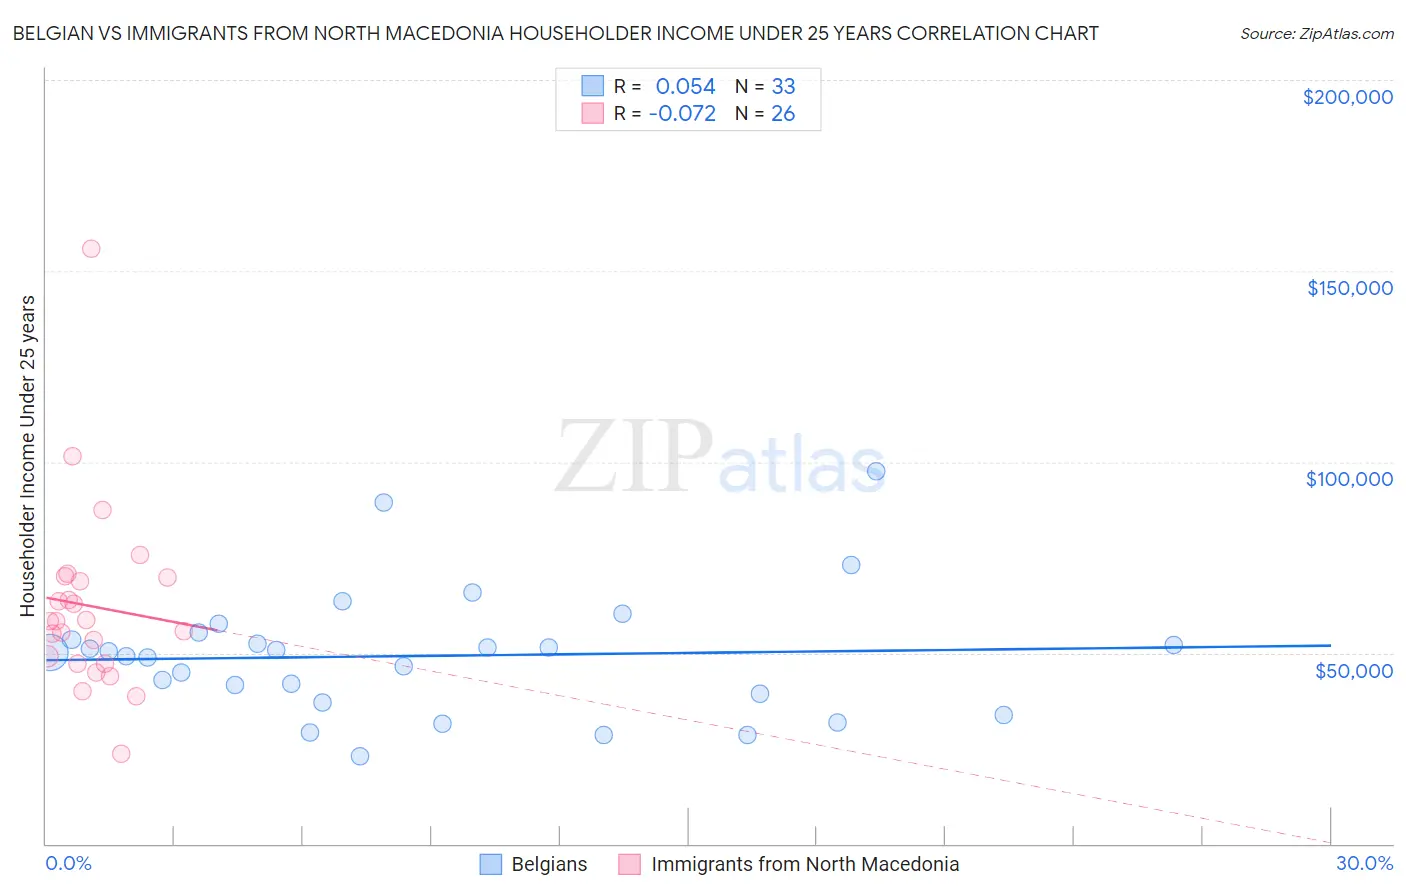 Belgian vs Immigrants from North Macedonia Householder Income Under 25 years